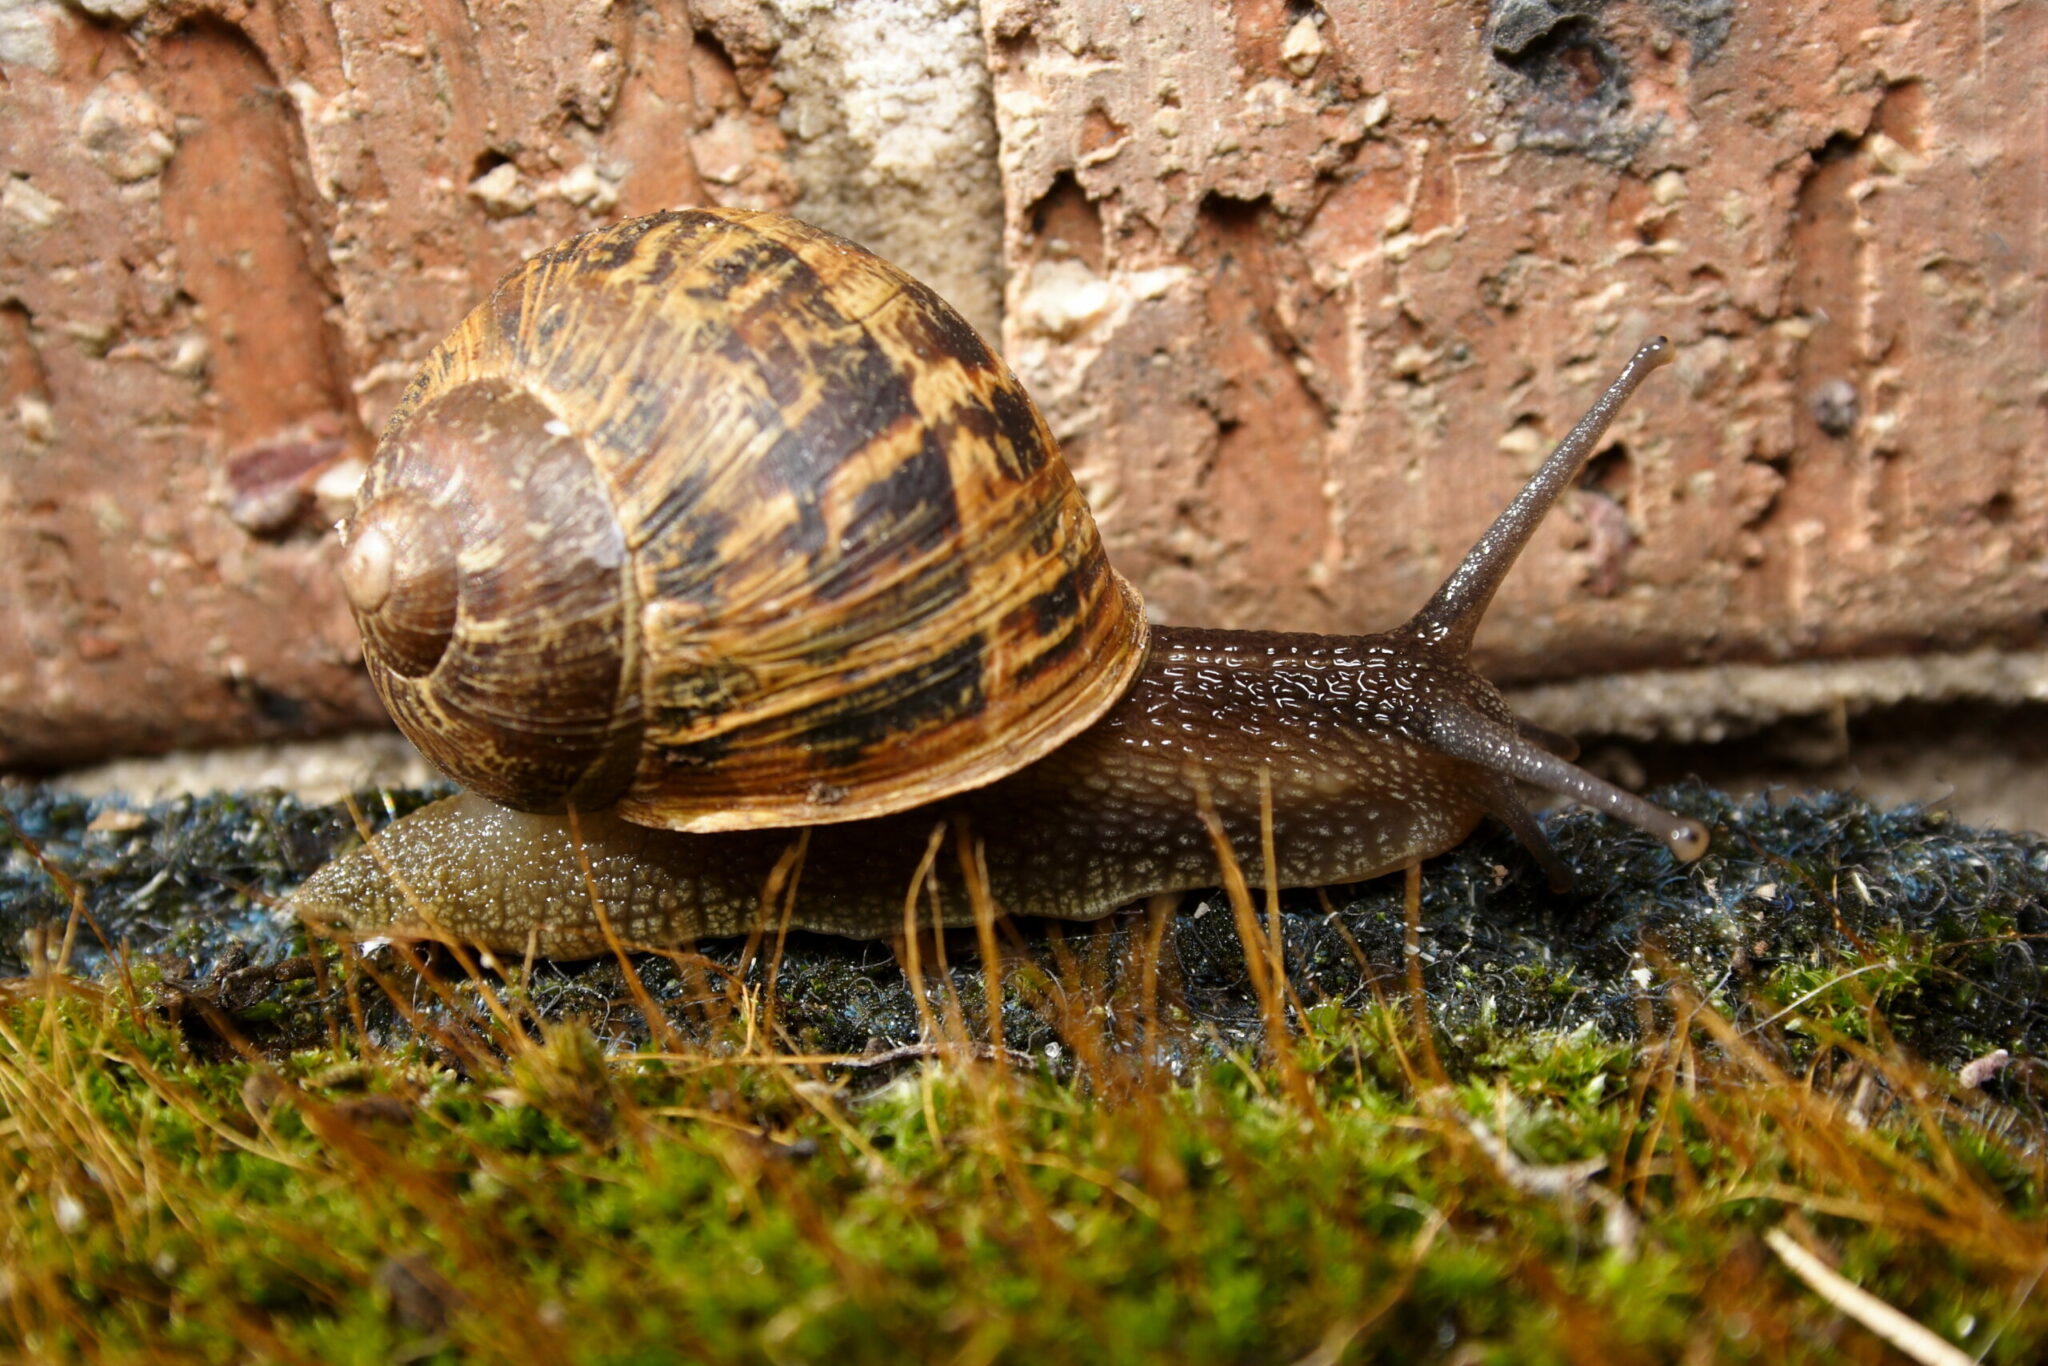 how do snails mate and reproduce and what species of snails are commonly eaten in restaurants in europe scaled